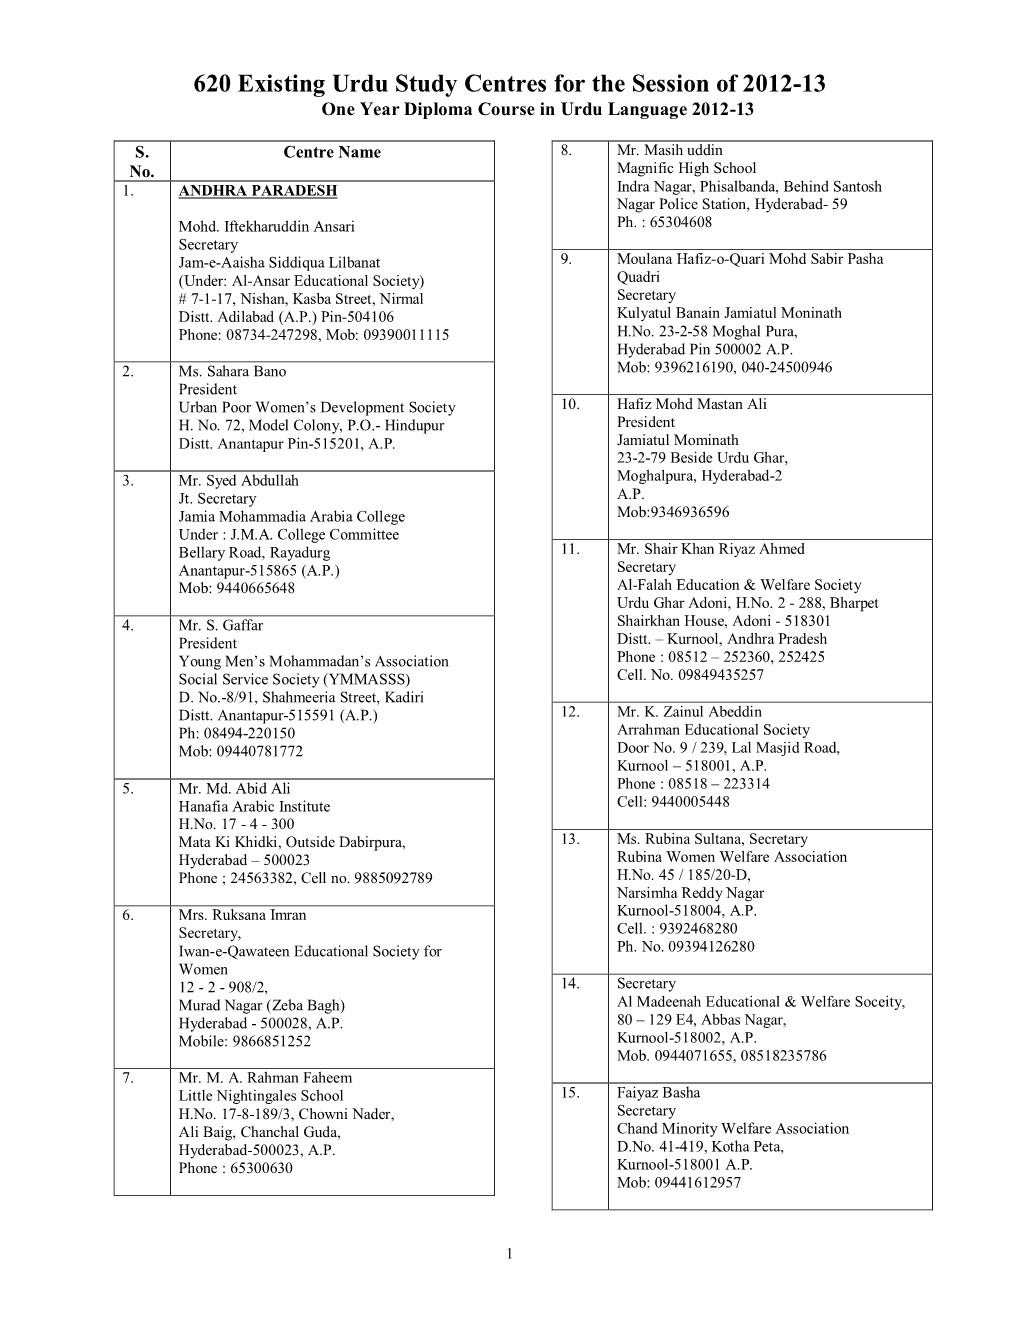 620 Existing Urdu Study Centres for the Session of 2012-13 One Year Diploma Course in Urdu Language 2012-13